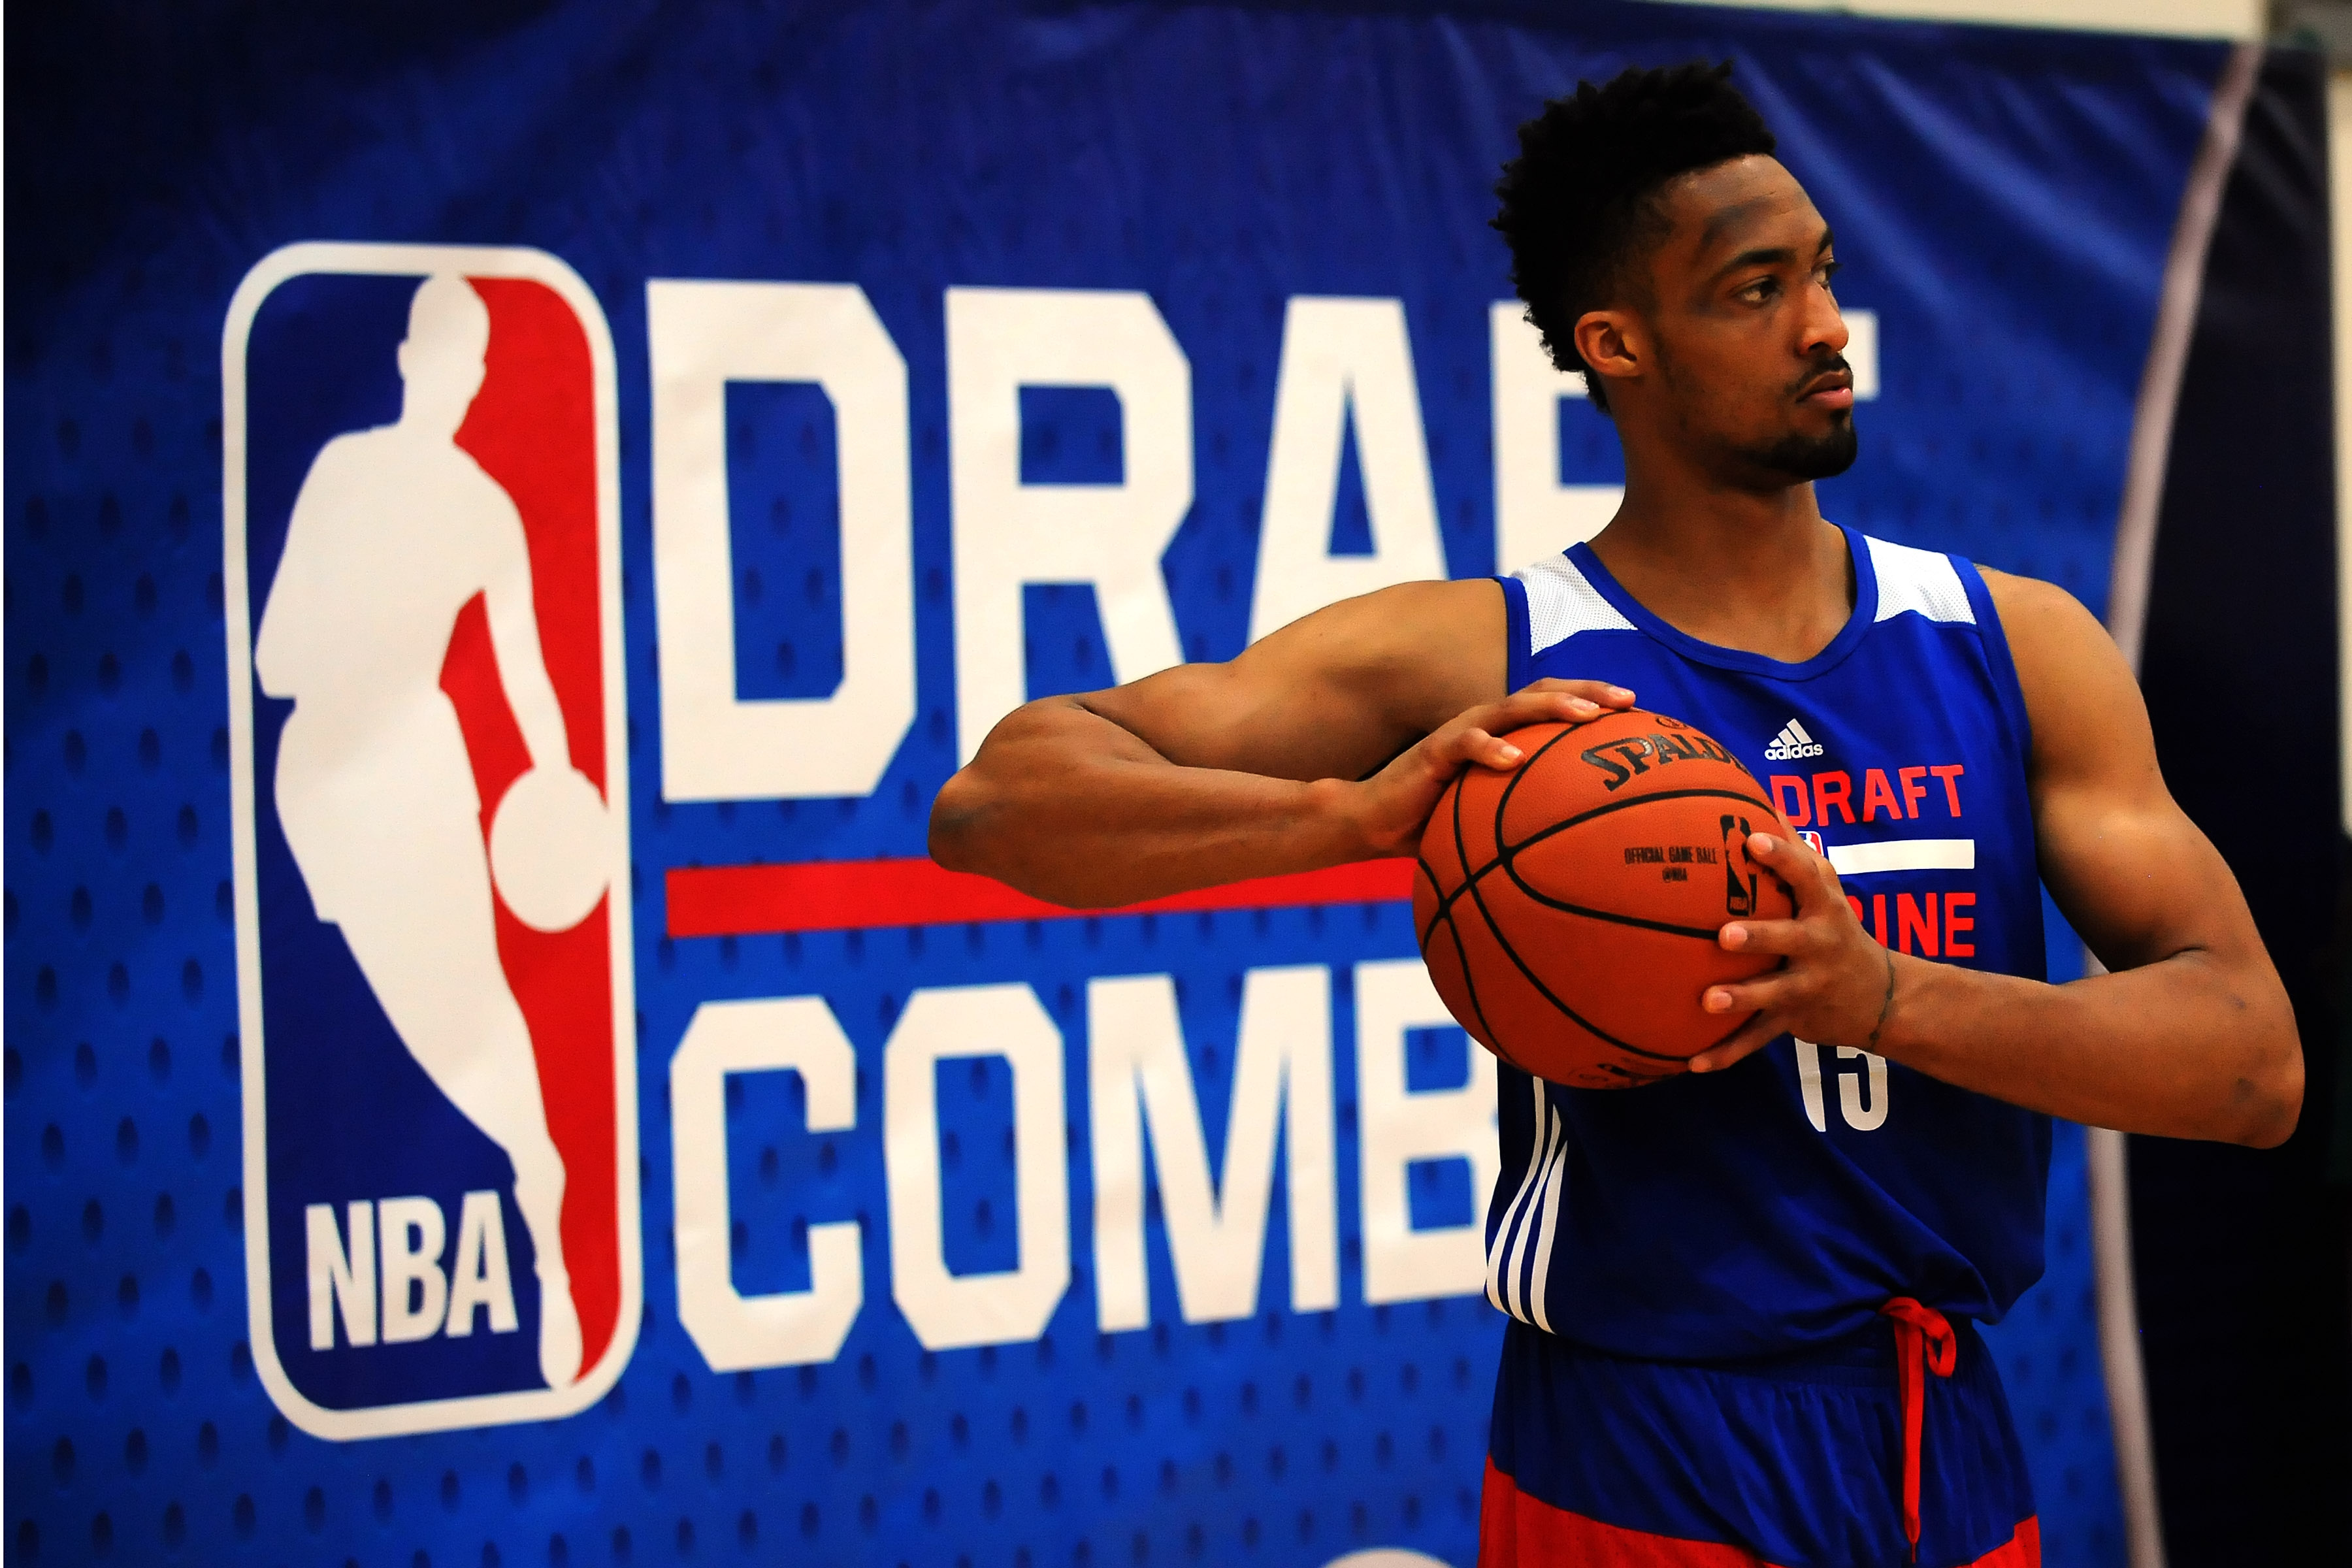 CHICAGO, IL - MAY 14:  J.P. Tokoto #15 stretches during the 2015 NBA Draft Combine on May 14, 2015 at Quest Multiplex in Chicago, Illinois. NOTE TO USER: User expressly acknowledges and agrees that, by downloading and/or using this photograph, user is consenting to the terms and conditions of the Getty Images License Agreement.  Mandatory Copyright Notice: Copyright 2013 NBAE (Photo by Randy Belice/NBAE via Getty Images)